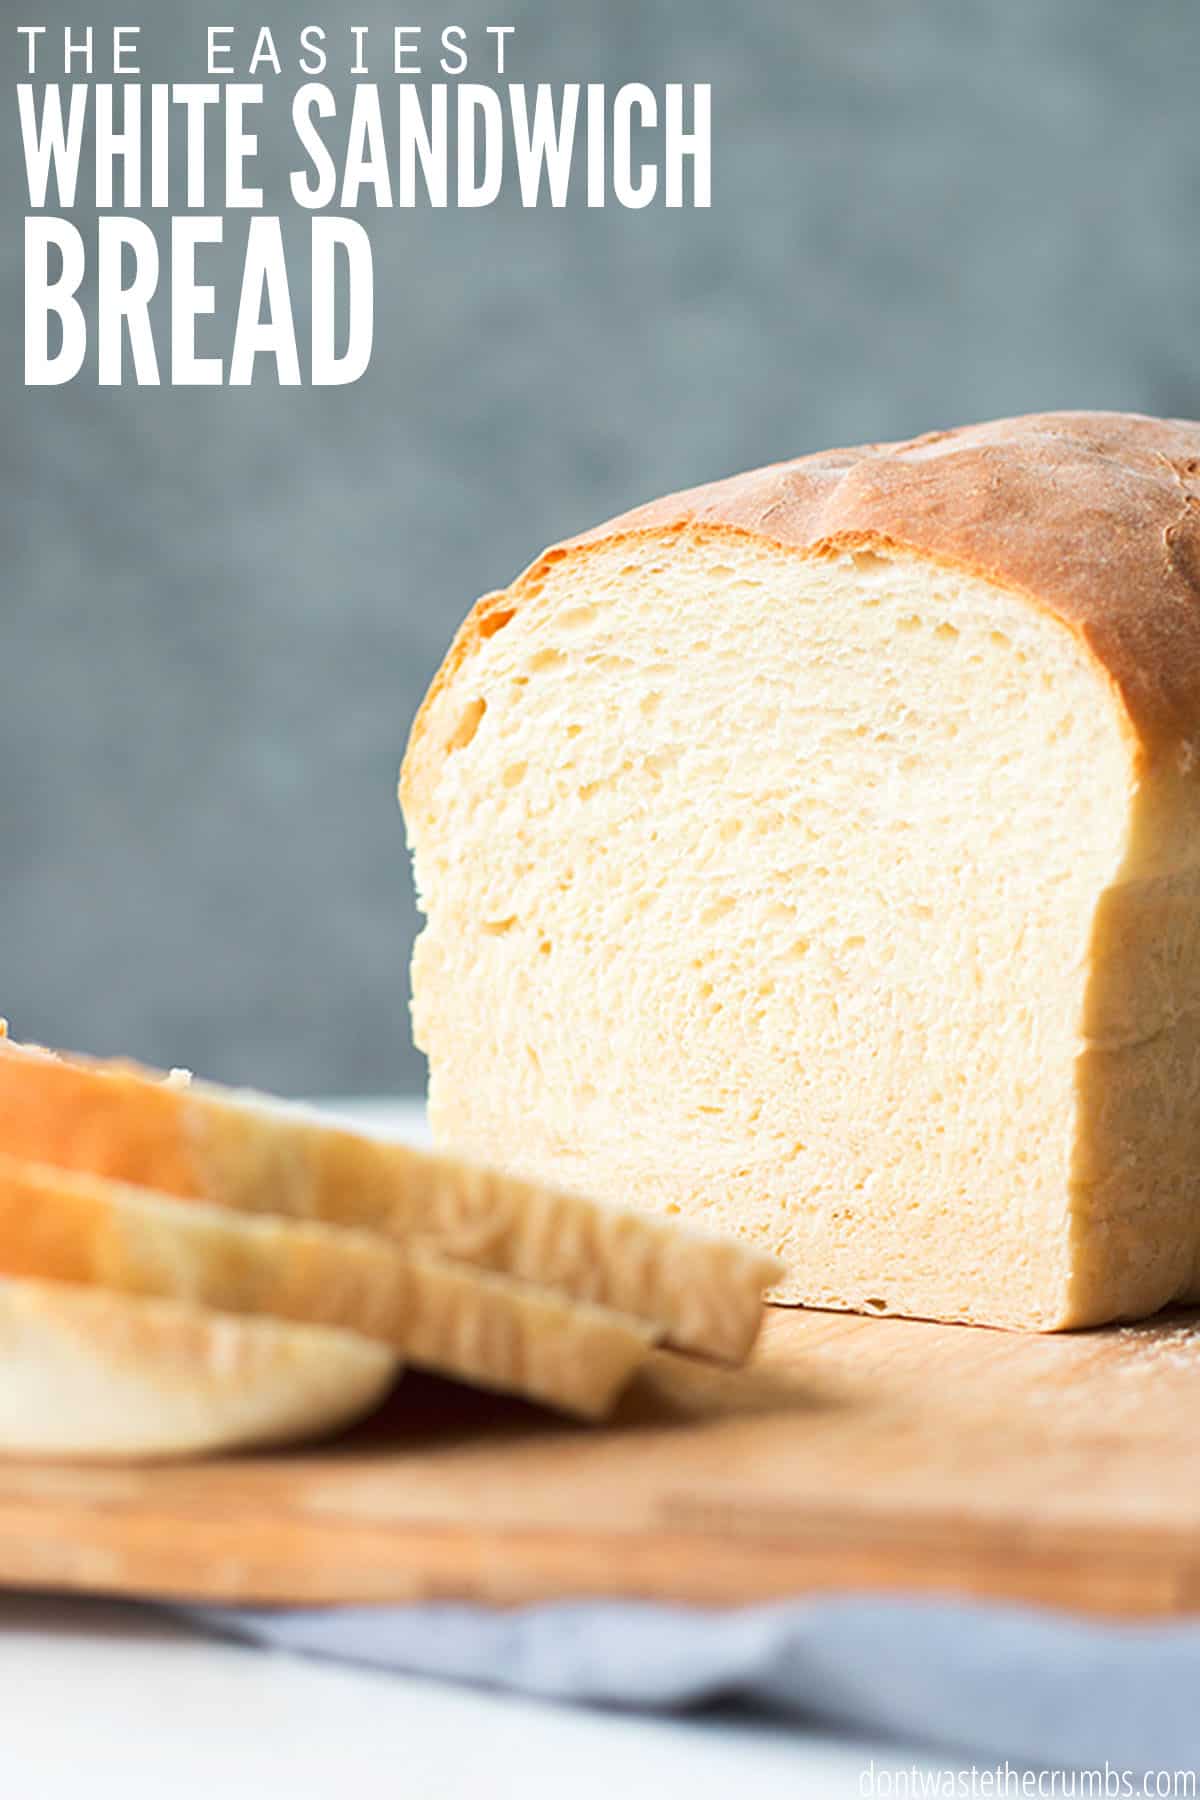 A sliced homemade white sandwich bread with the text overlay, "The Easiest White Sandwich Bread Recipe."